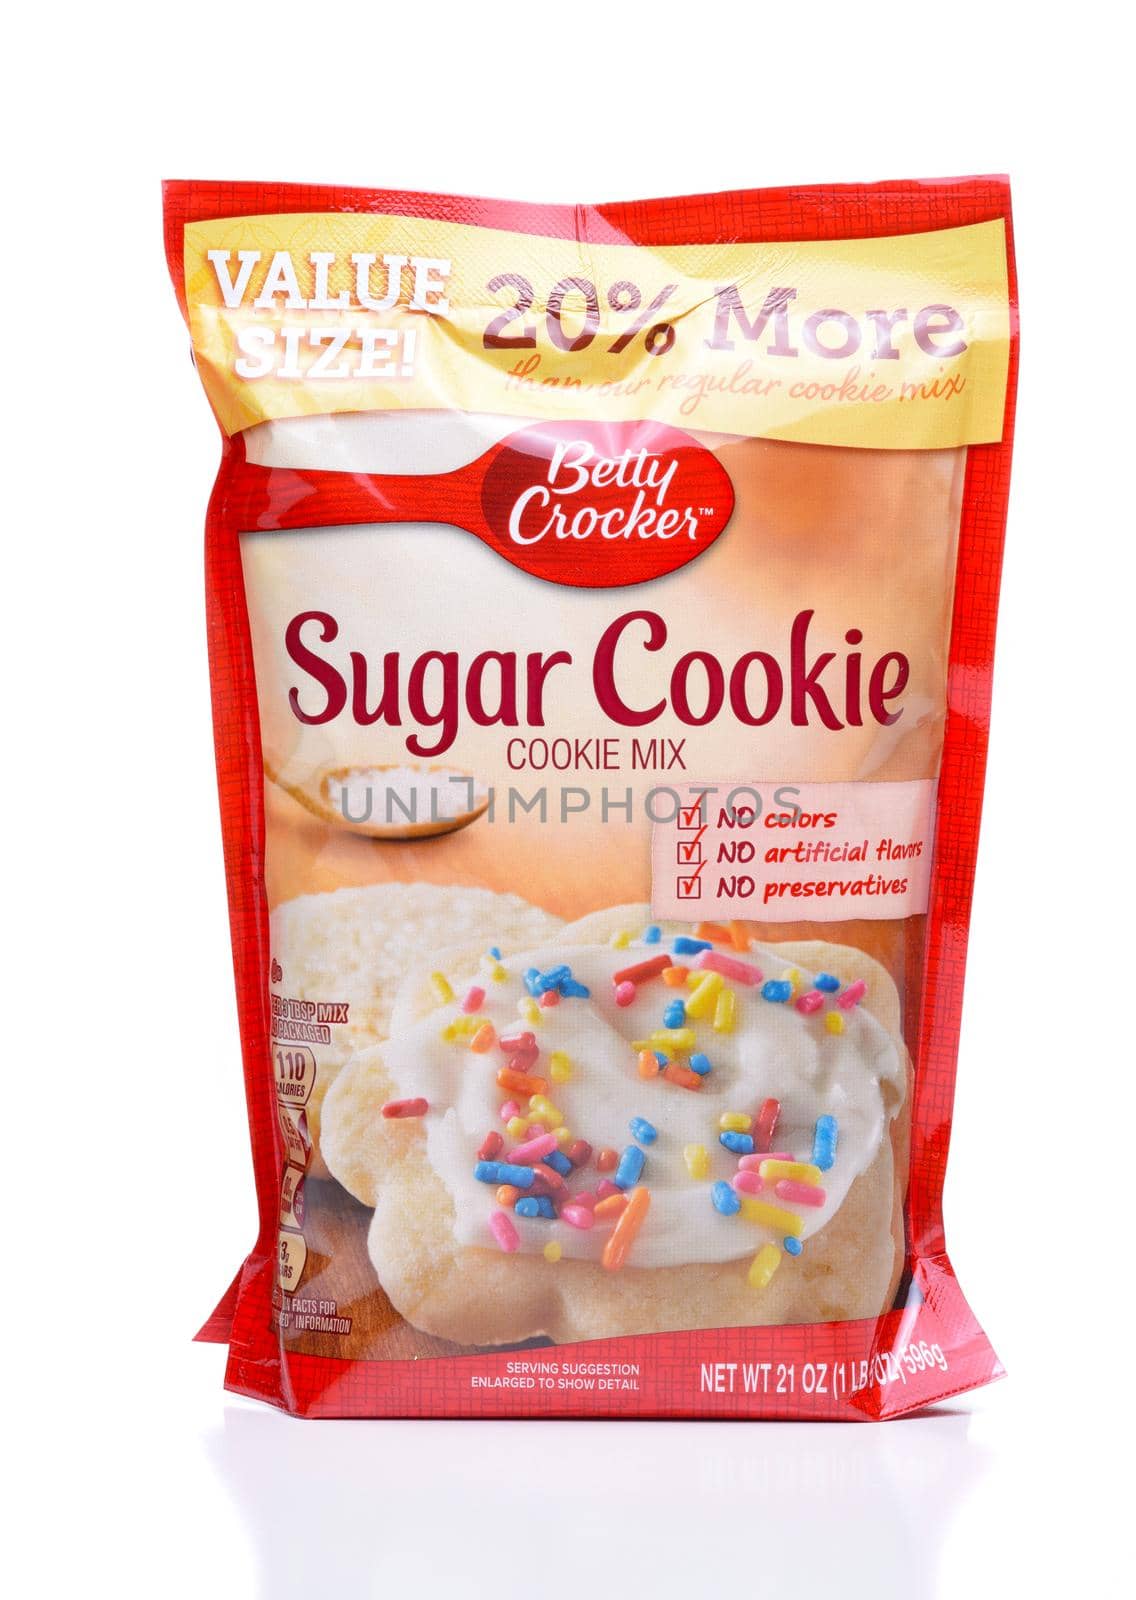 IRVINE, CALIFORNIA - DEC 4, 2018: Betty Crocker Sugar Cookie Mix. The package contains most of the ingerdients to make the popular snack food.